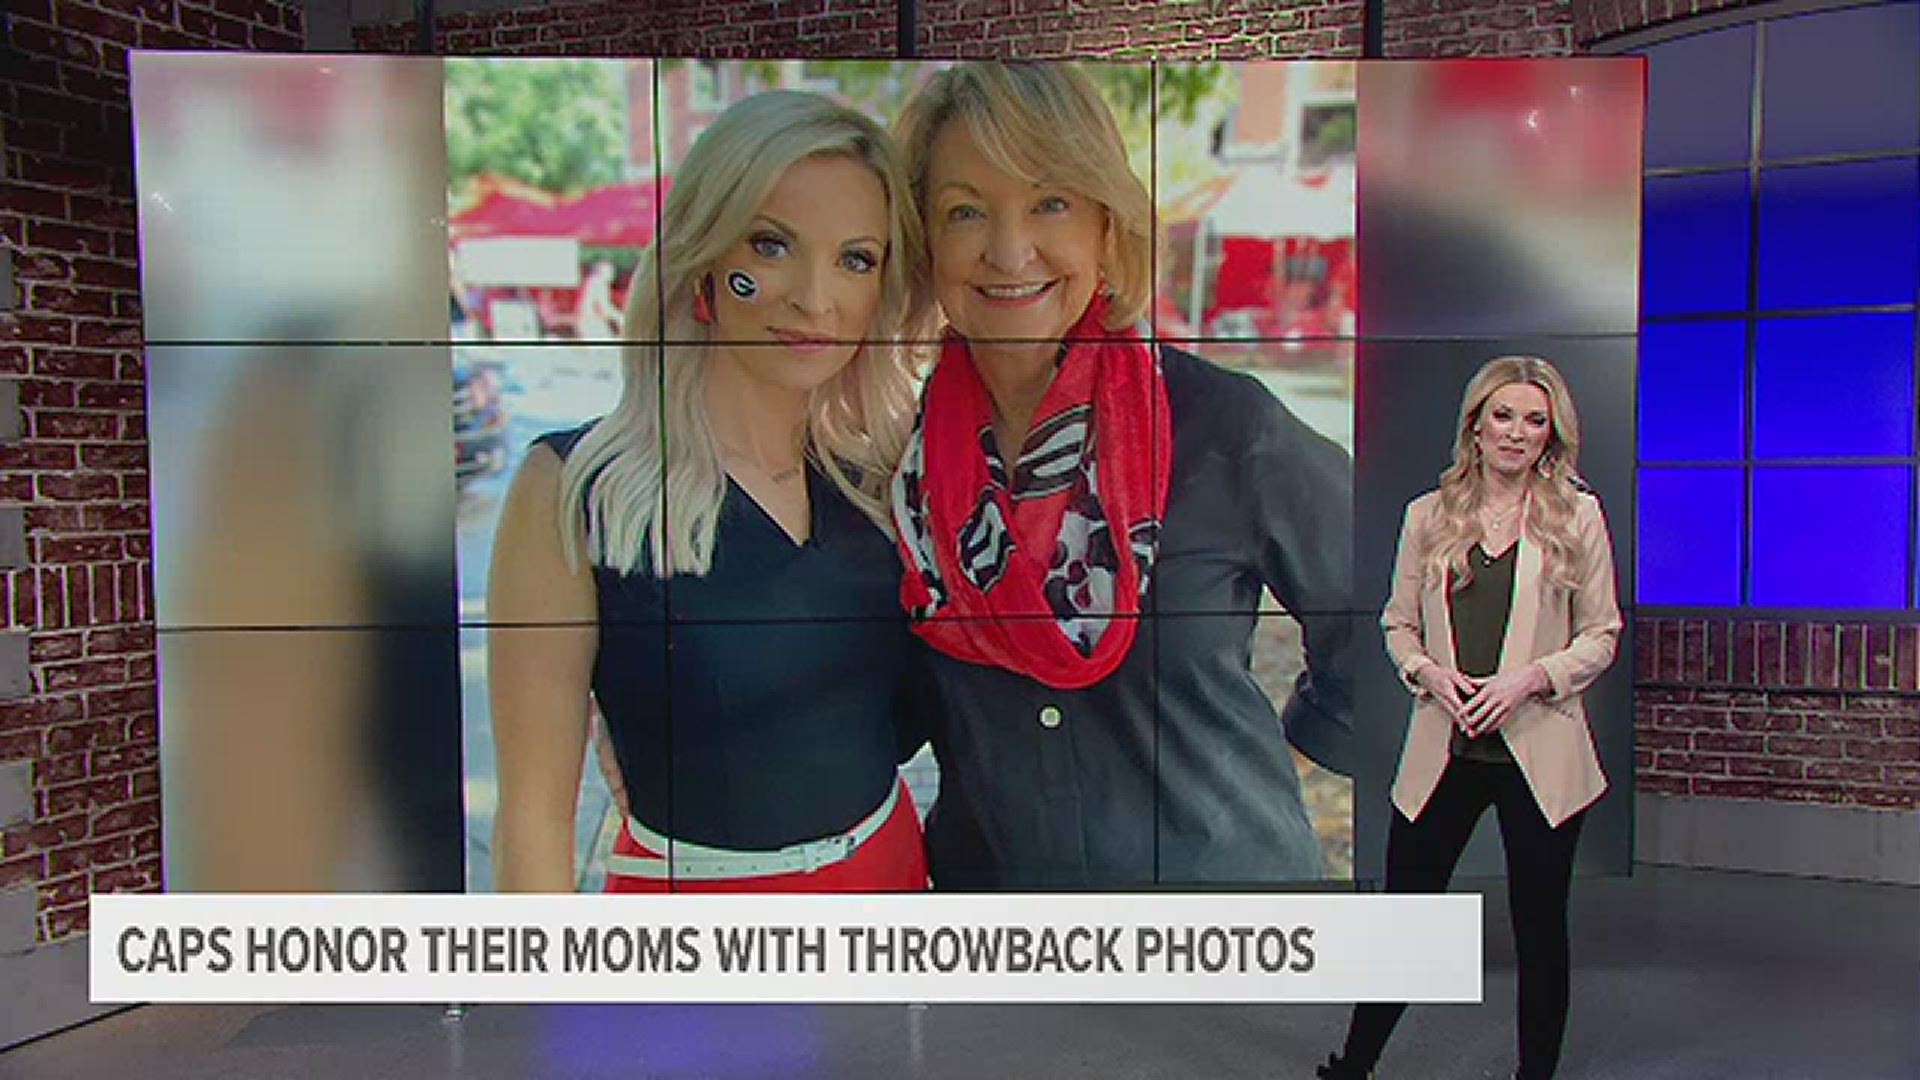 Capitals share old pictures, paying tribute to their hockey moms